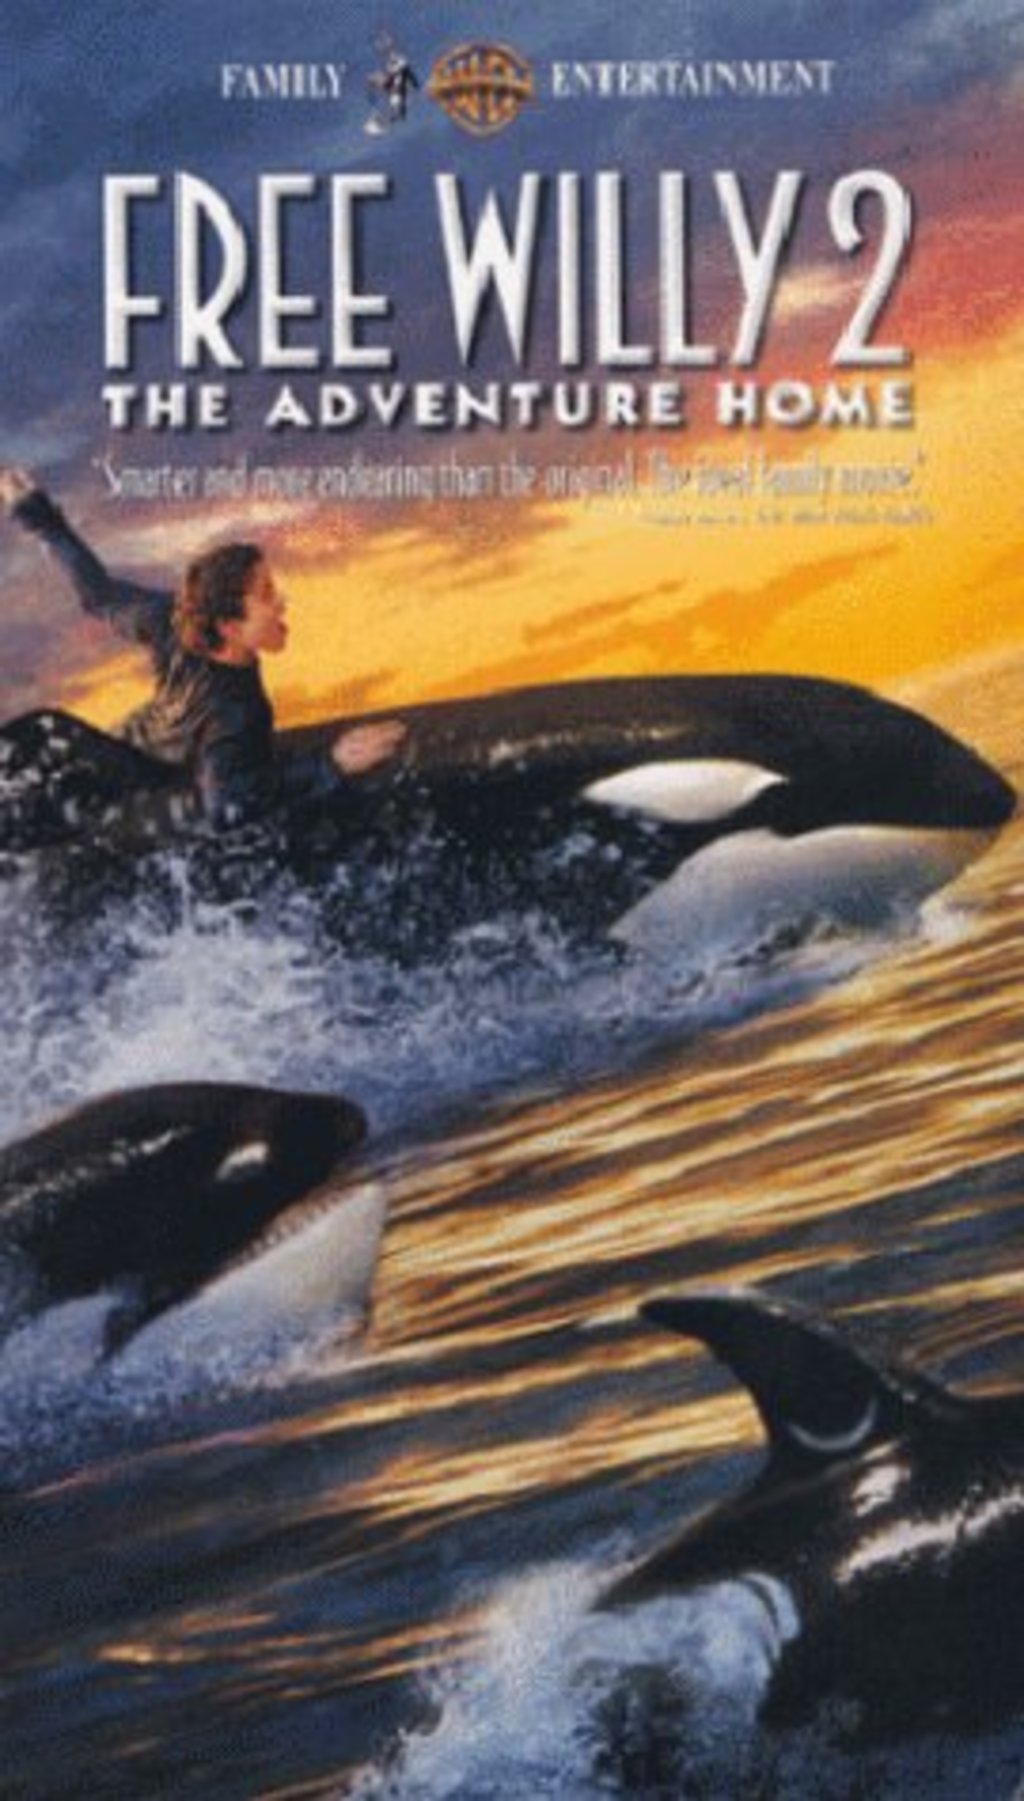 watch free willy 2 online megavideo